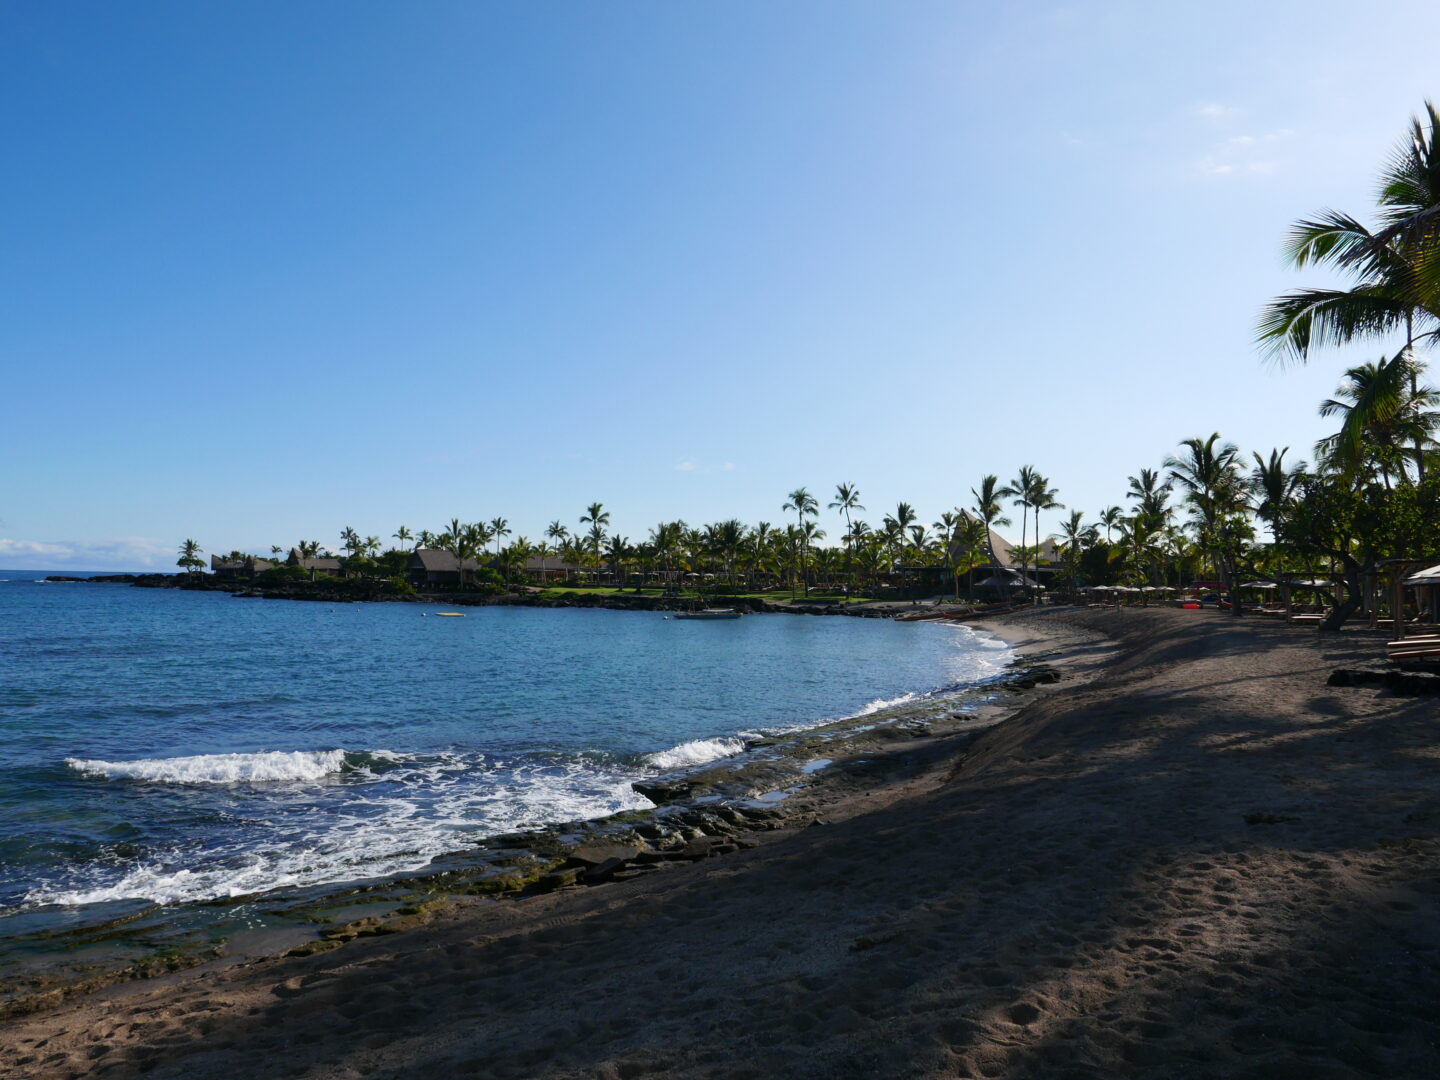 a view of the shore of Kona Village